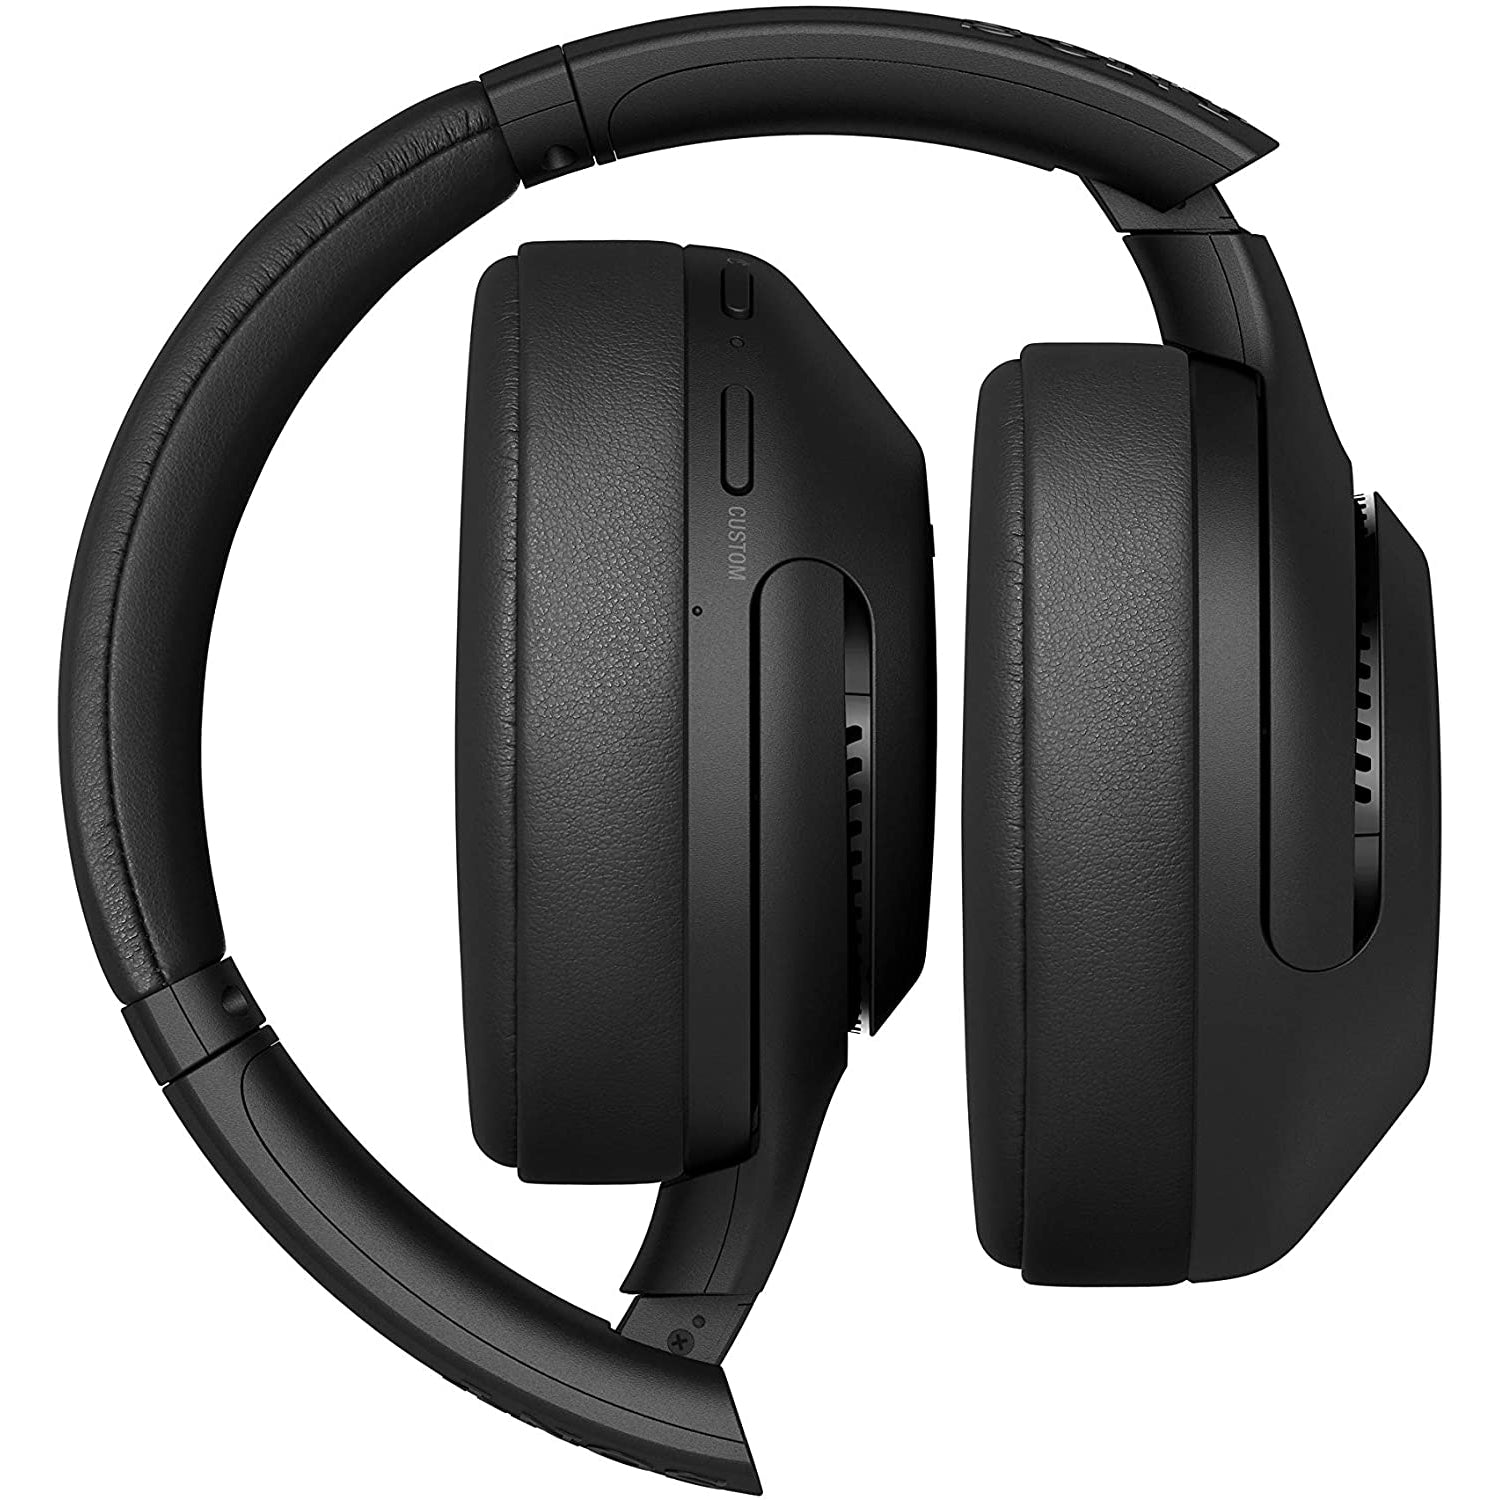 Sony WH-XB900N Noise Cancelling Wireless Bluetooth Headphones